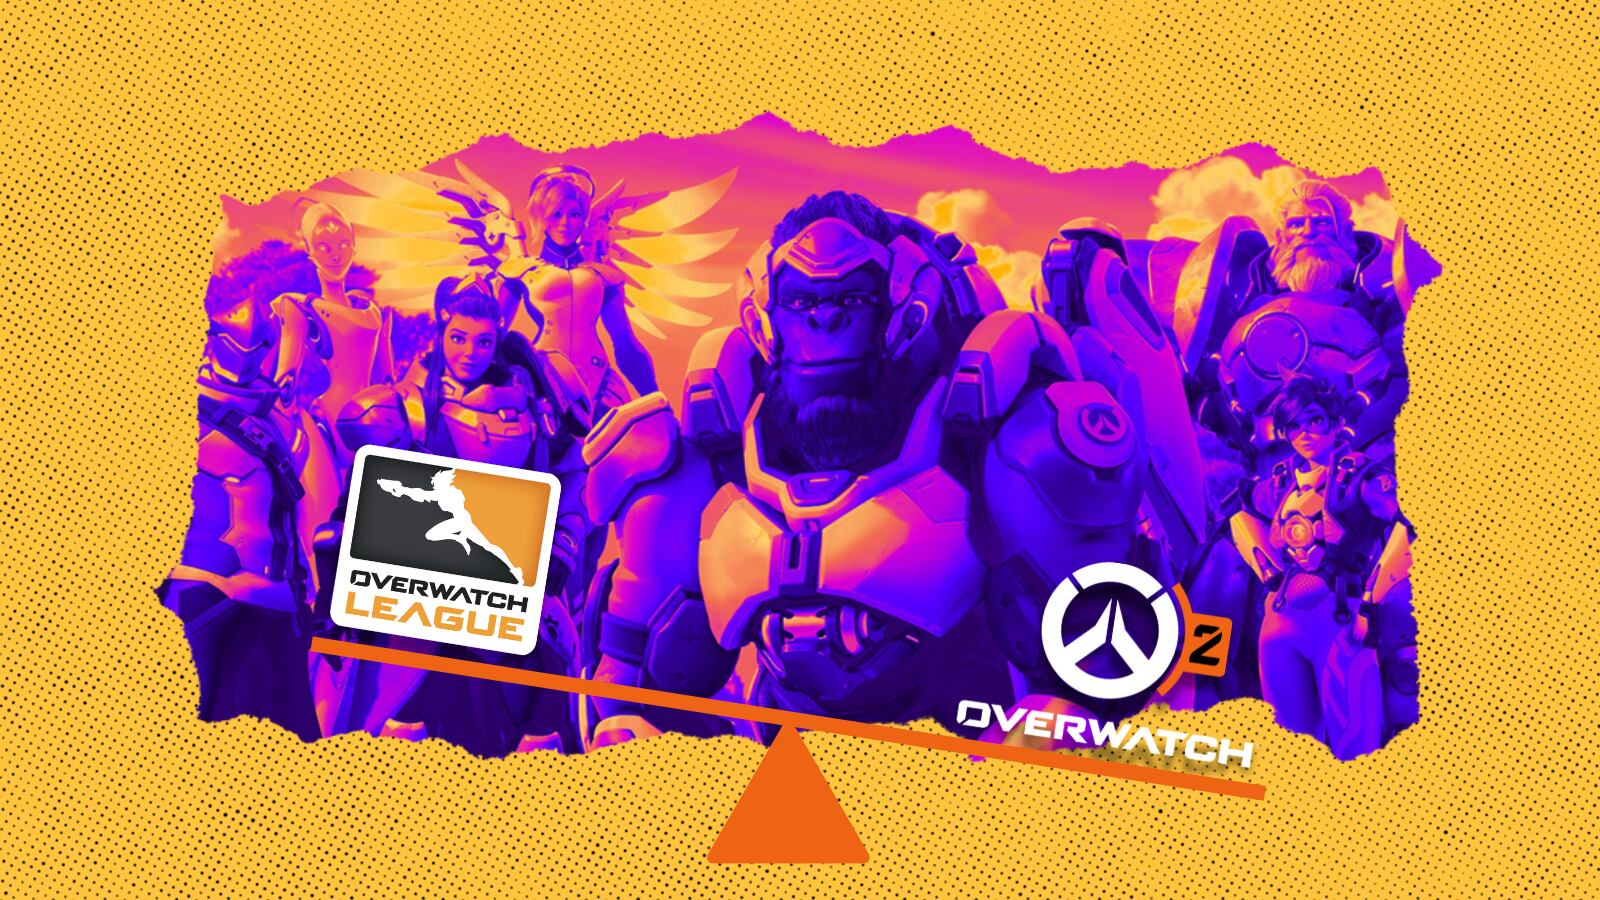 The Overwatch League will sail in uncharted waters in the 2022 season, with the pricey...